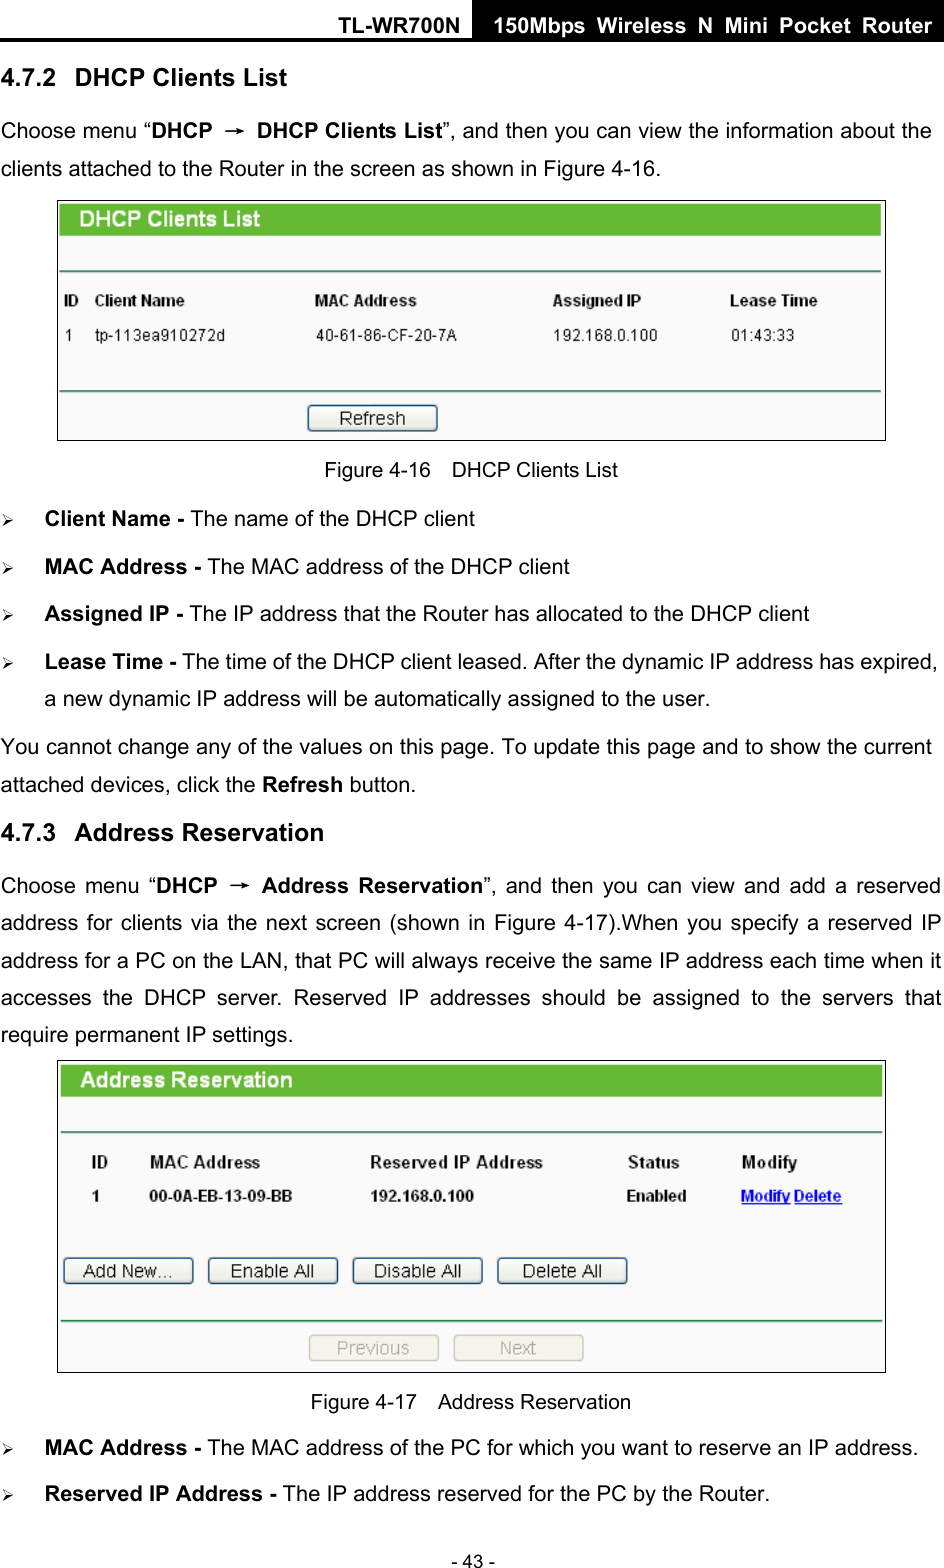 TL-WR700N 150Mbps Wireless N Mini Pocket Router - 43 - 4.7.2  DHCP Clients List Choose menu “DHCP  →  DHCP Clients List”, and then you can view the information about the clients attached to the Router in the screen as shown in Figure 4-16.  Figure 4-16    DHCP Clients List ¾ Client Name - The name of the DHCP client   ¾ MAC Address - The MAC address of the DHCP client   ¾ Assigned IP - The IP address that the Router has allocated to the DHCP client ¾ Lease Time - The time of the DHCP client leased. After the dynamic IP address has expired, a new dynamic IP address will be automatically assigned to the user.     You cannot change any of the values on this page. To update this page and to show the current attached devices, click the Refresh button. 4.7.3  Address Reservation Choose menu “DHCP  → Address Reservation”, and then you can view and add a reserved address for clients via the next screen (shown in Figure 4-17).When you specify a reserved IP address for a PC on the LAN, that PC will always receive the same IP address each time when it accesses the DHCP server. Reserved IP addresses should be assigned to the servers that require permanent IP settings.    Figure 4-17  Address Reservation ¾ MAC Address - The MAC address of the PC for which you want to reserve an IP address. ¾ Reserved IP Address - The IP address reserved for the PC by the Router. 